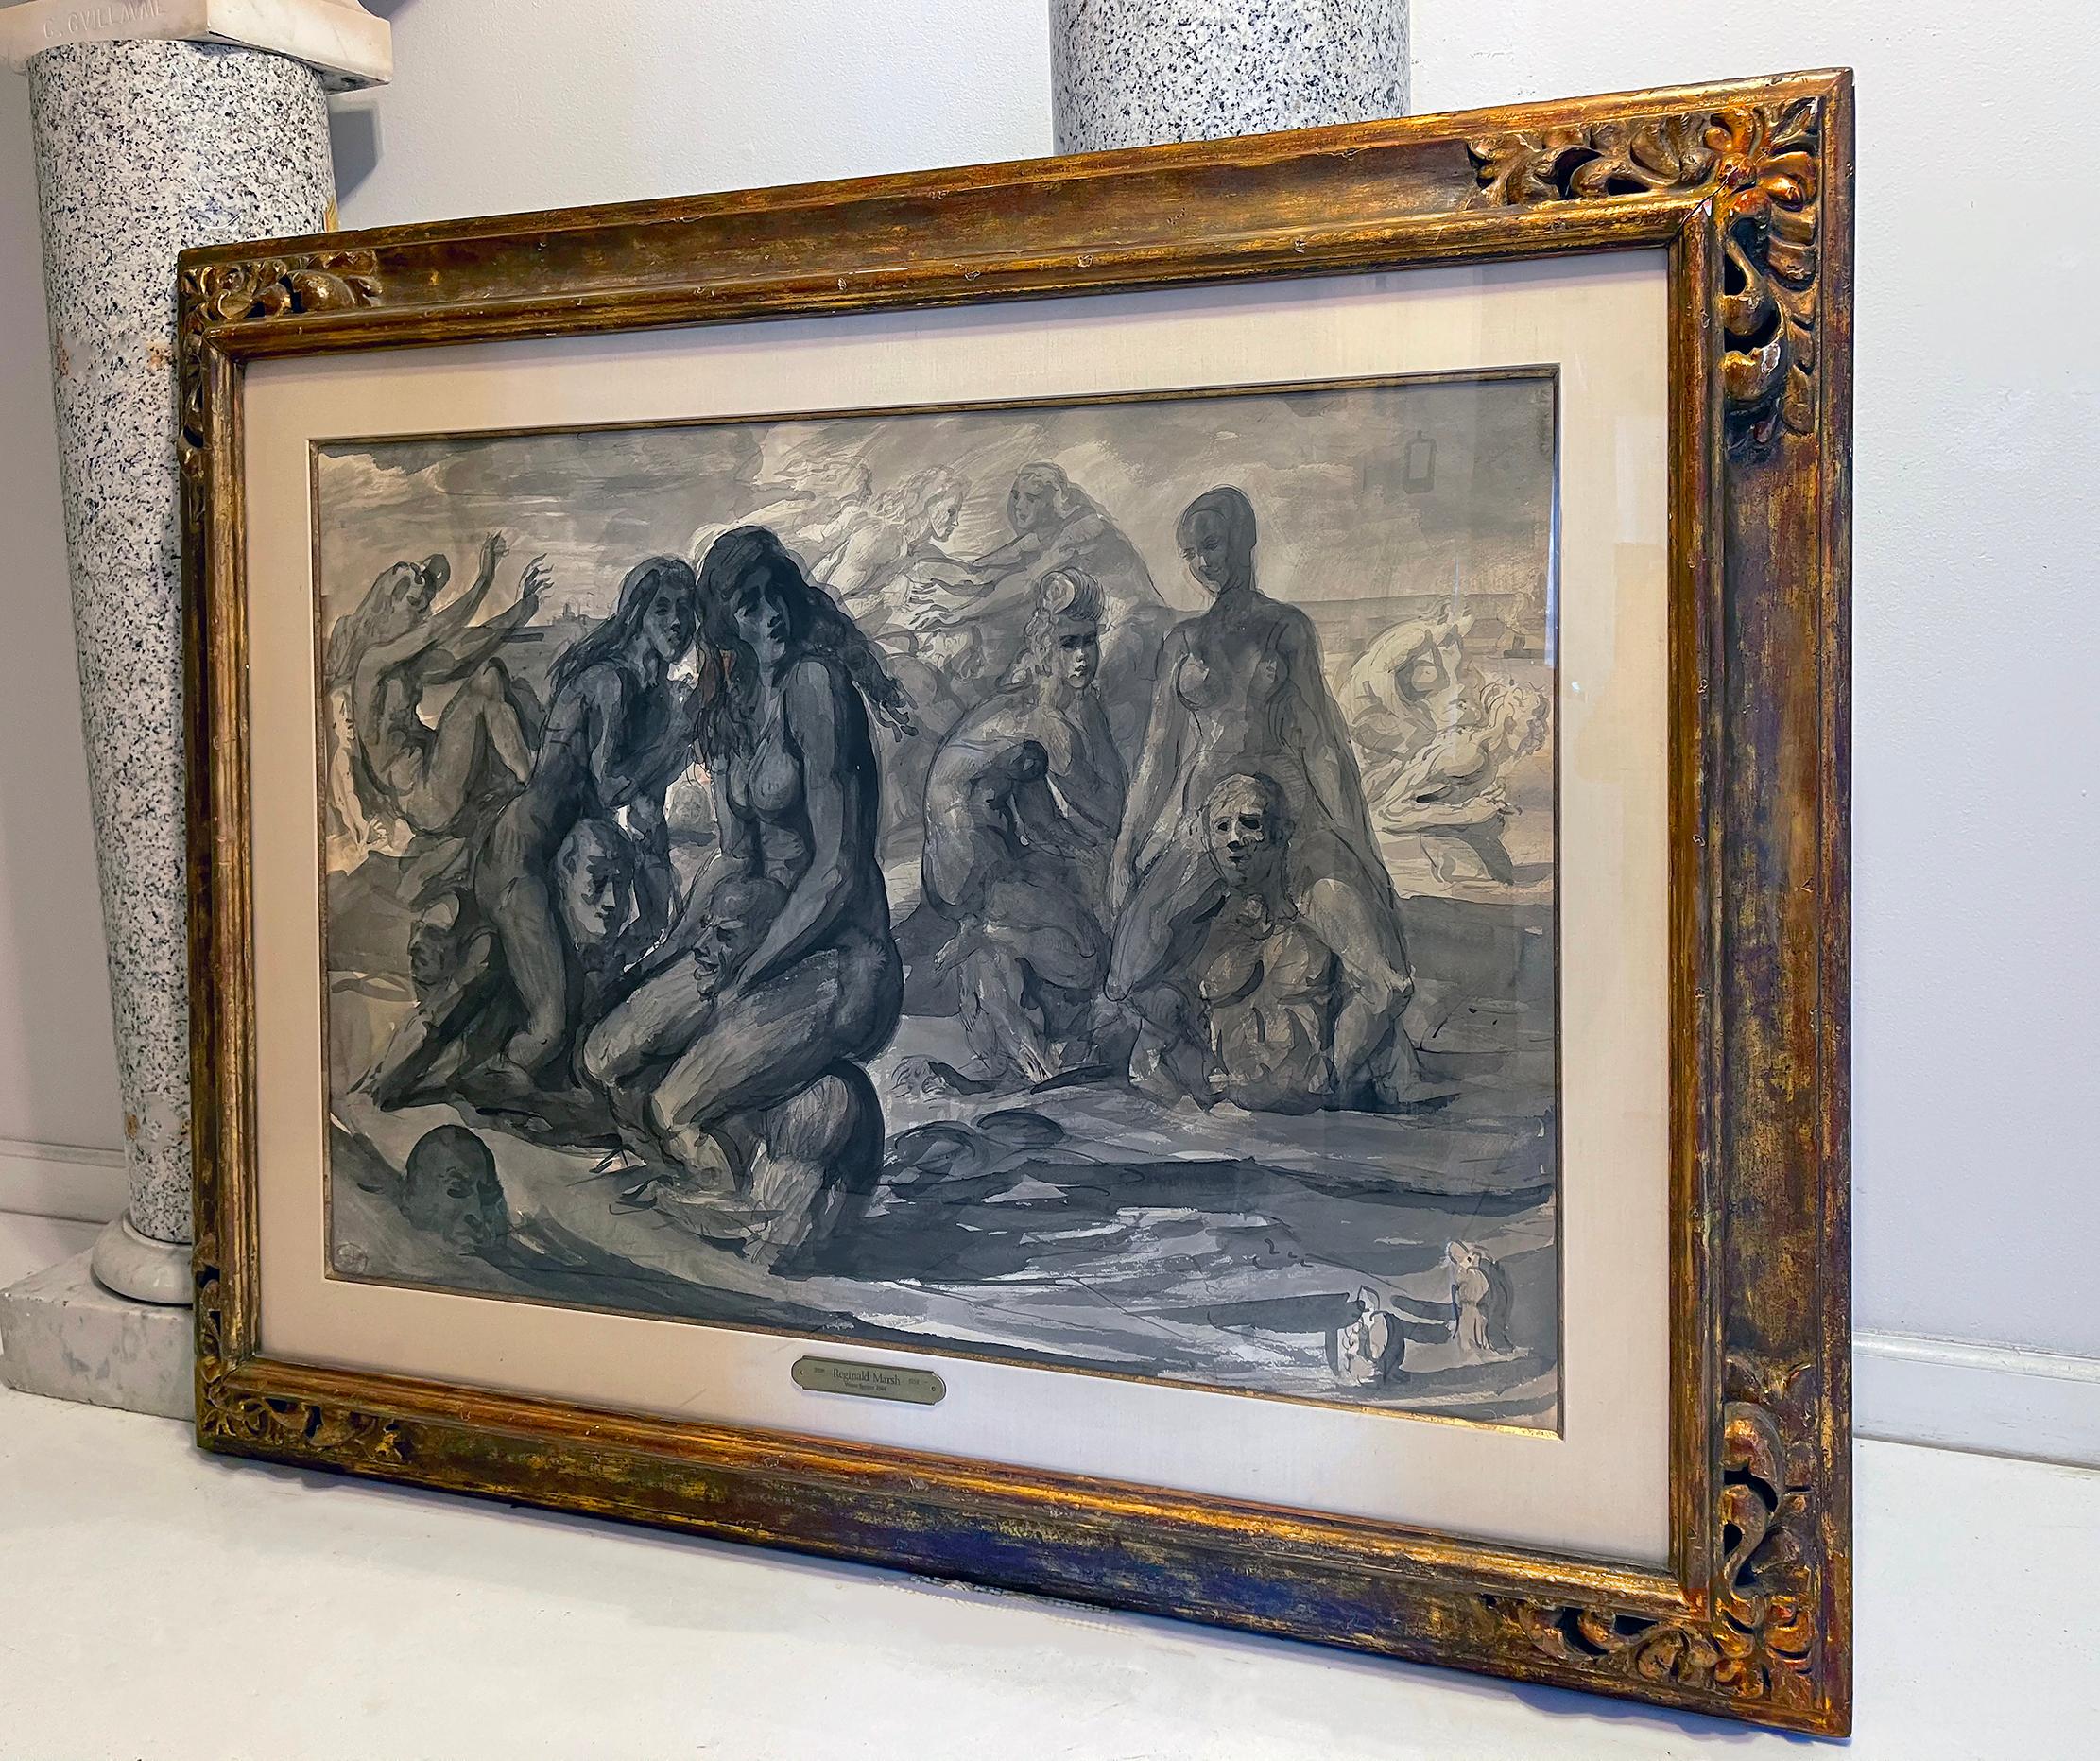 Historically, academic artists have always featured the central figures in their composition in a prominent light with the background figures being darker.   In water sports, Reginald Marsh does the opposite. The central figures are in shadow and